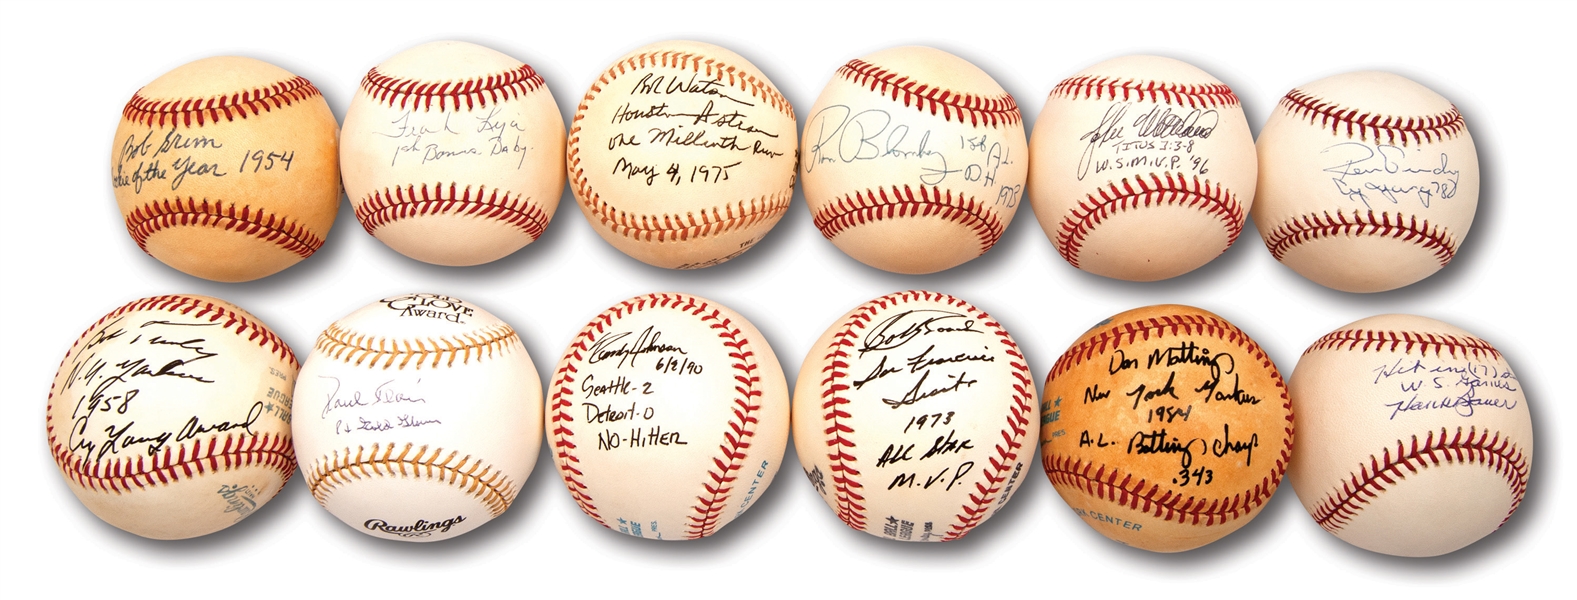 COLLECTION OF (12) NEW YORK YANKEES SINGLE SIGNED BASEBALLS WITH PERSONAL ACHIEVEMENT NOTATIONS